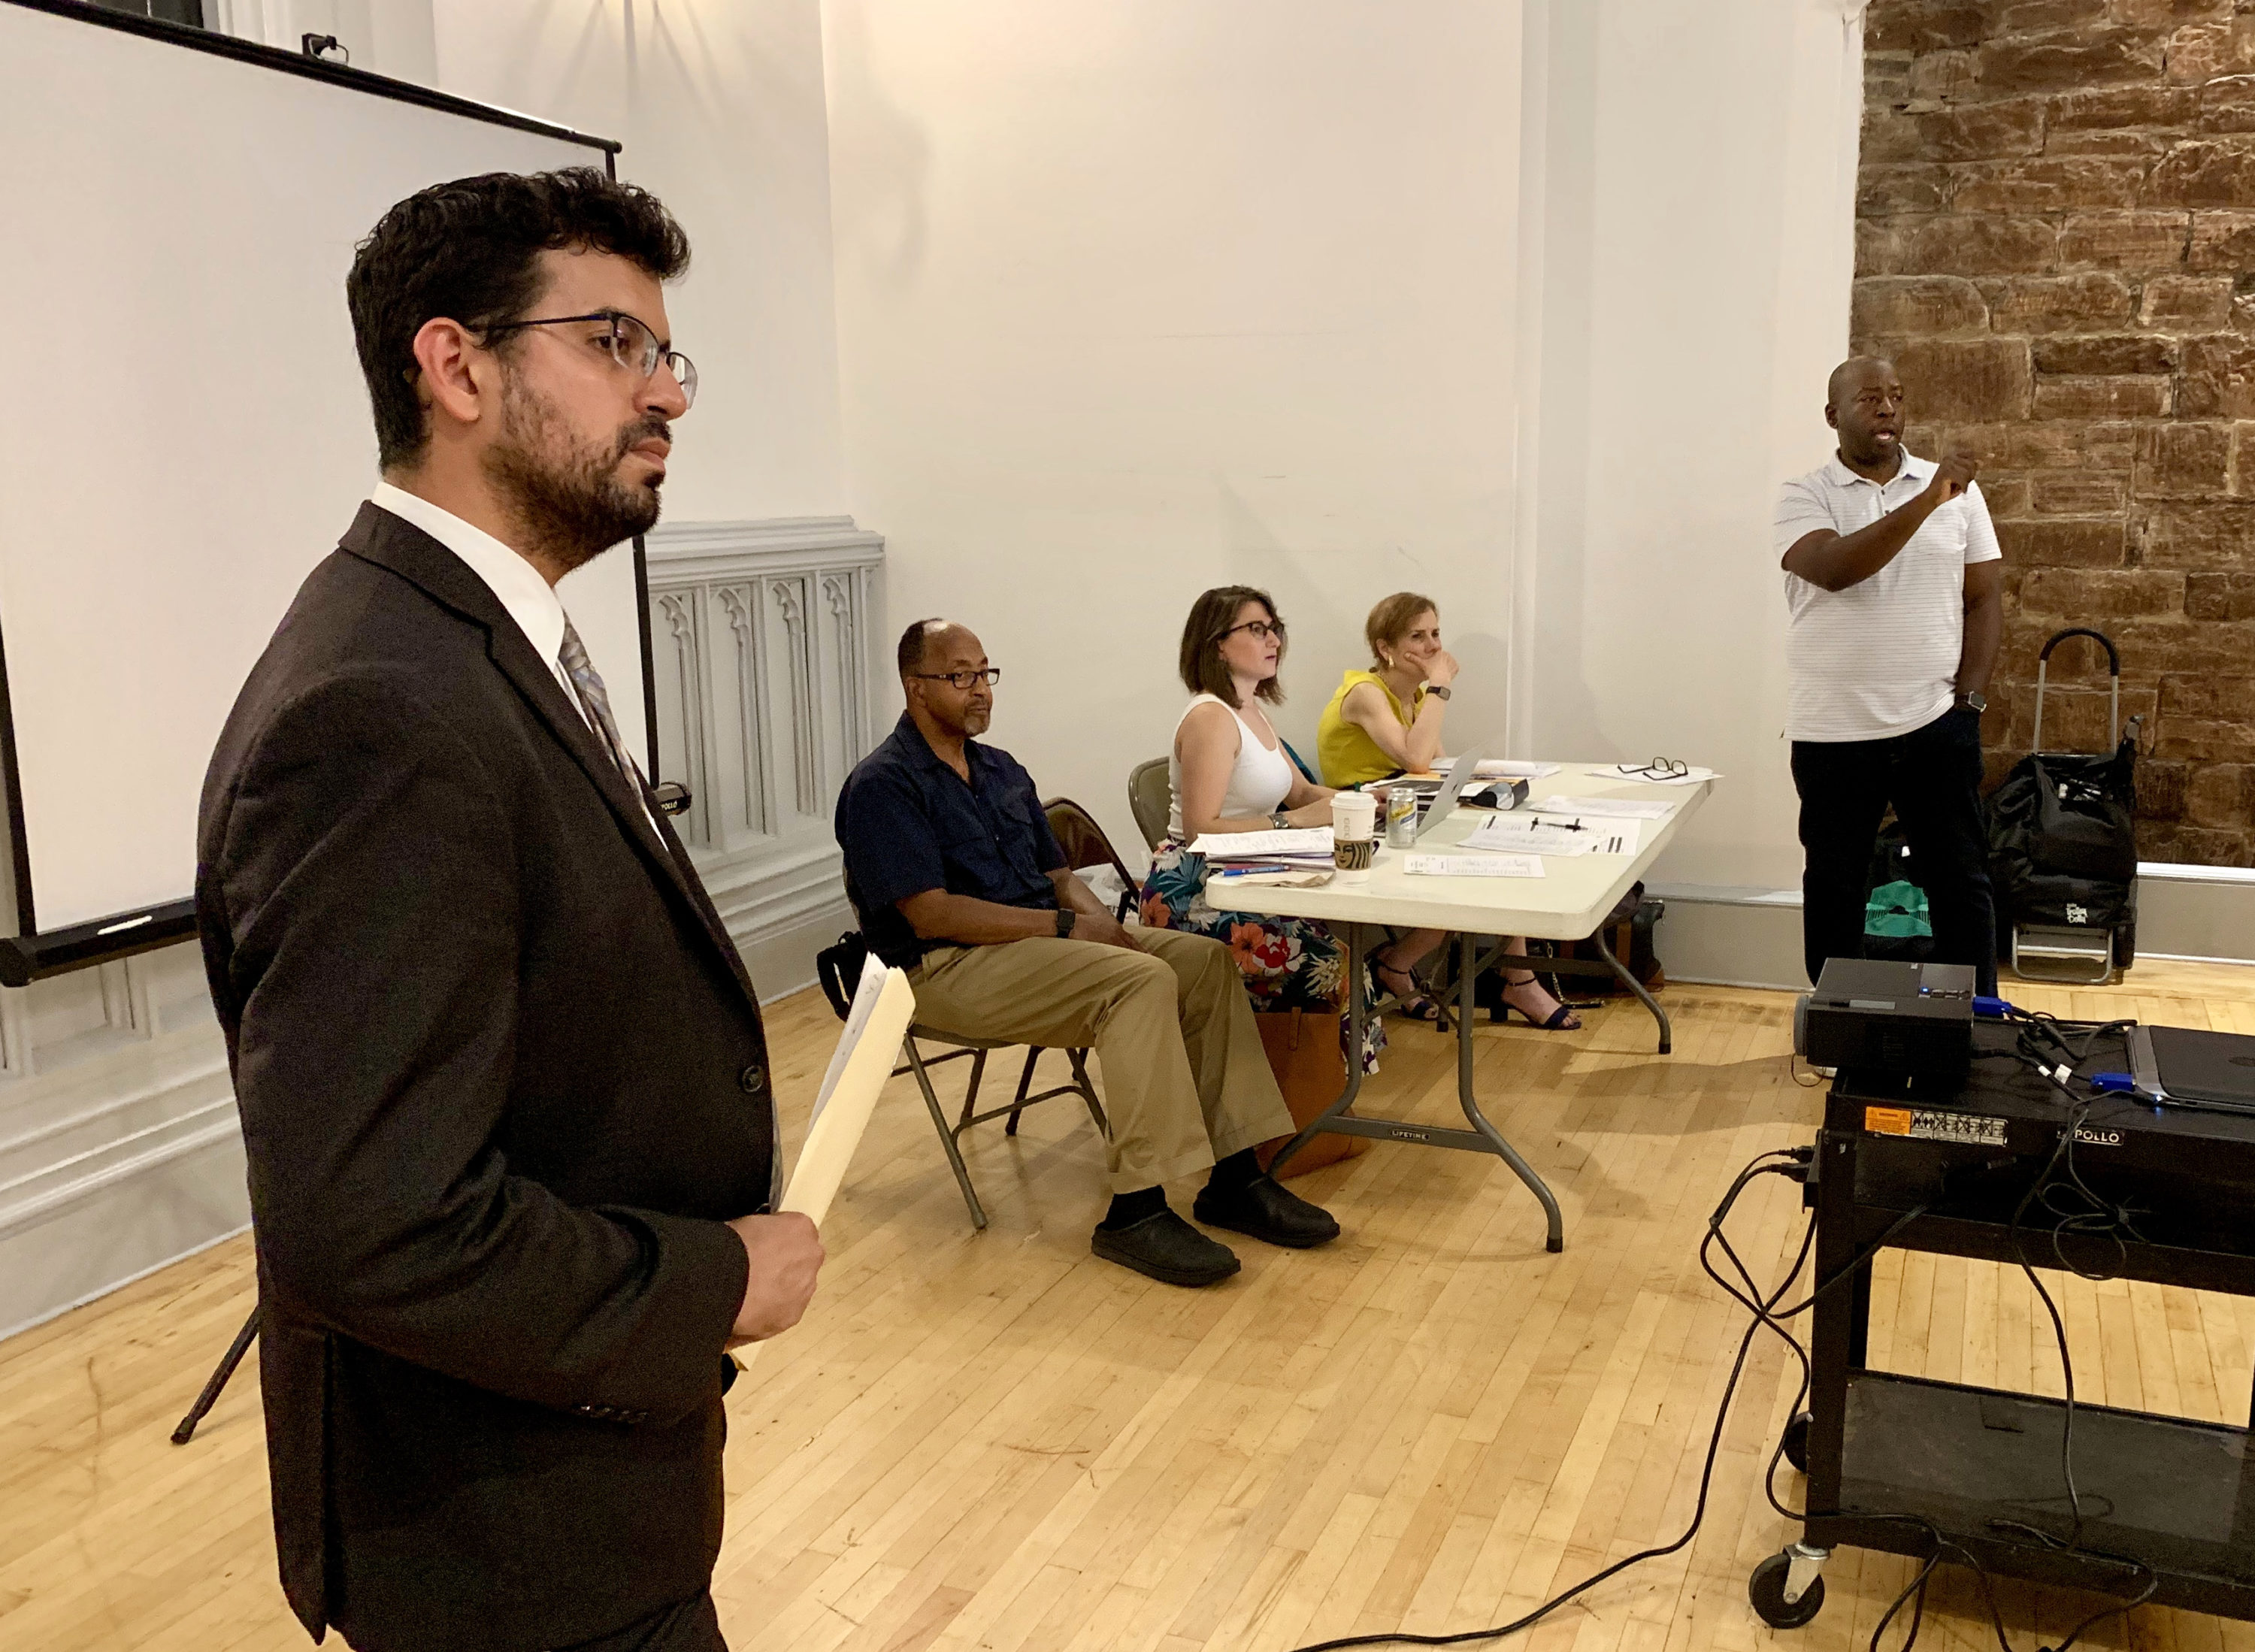 Glomani Bravo-Lopez, Councilmember Levin’s deputy chief of staff, asked the Community Board 2 board to hold off their vote on Willoughby Square Park for 30 days. In the back to the right is CB2 Chairperson Lenny Singletary. Eagle photo by Mary Frost.